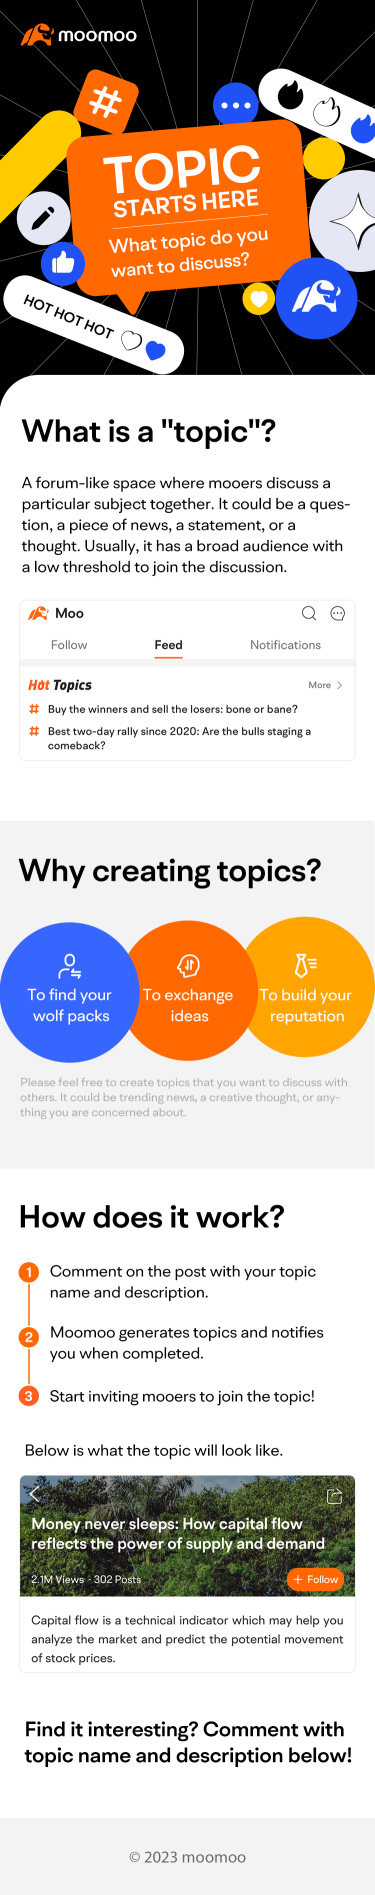 Topic Ideas Wanted: Ready to create the next hot topic?